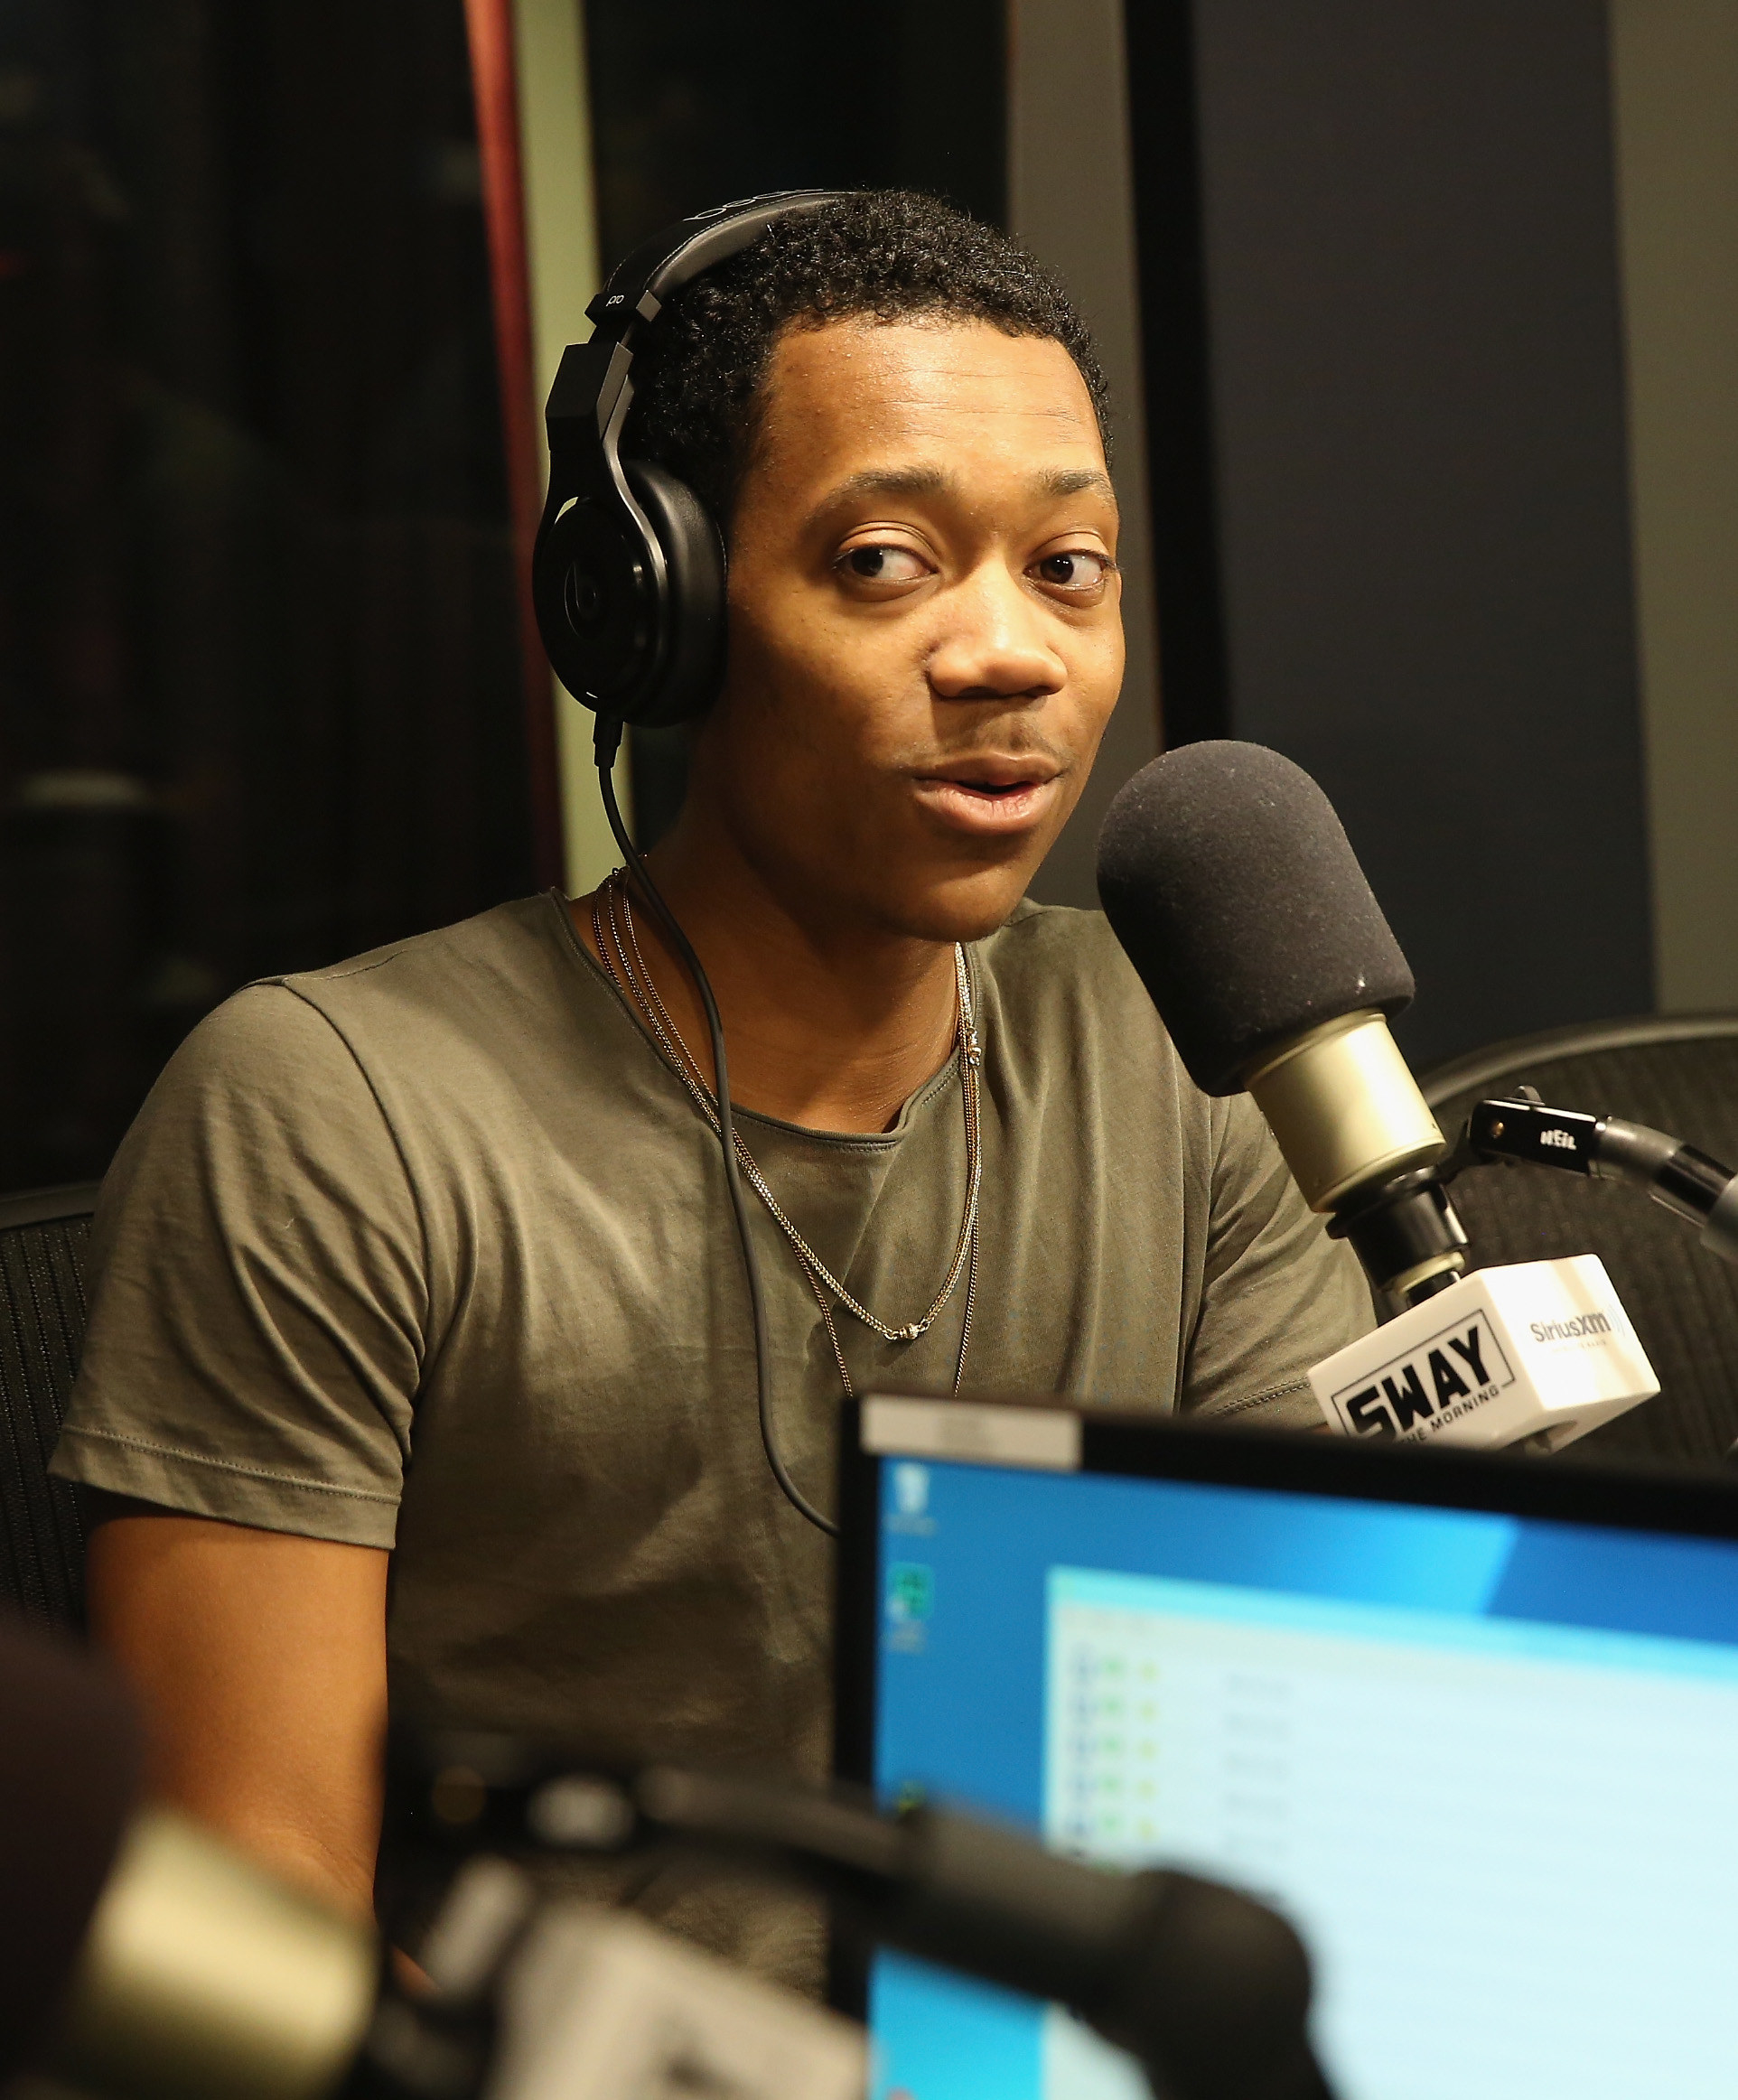 Tyler speaking into a mic during a radio interview